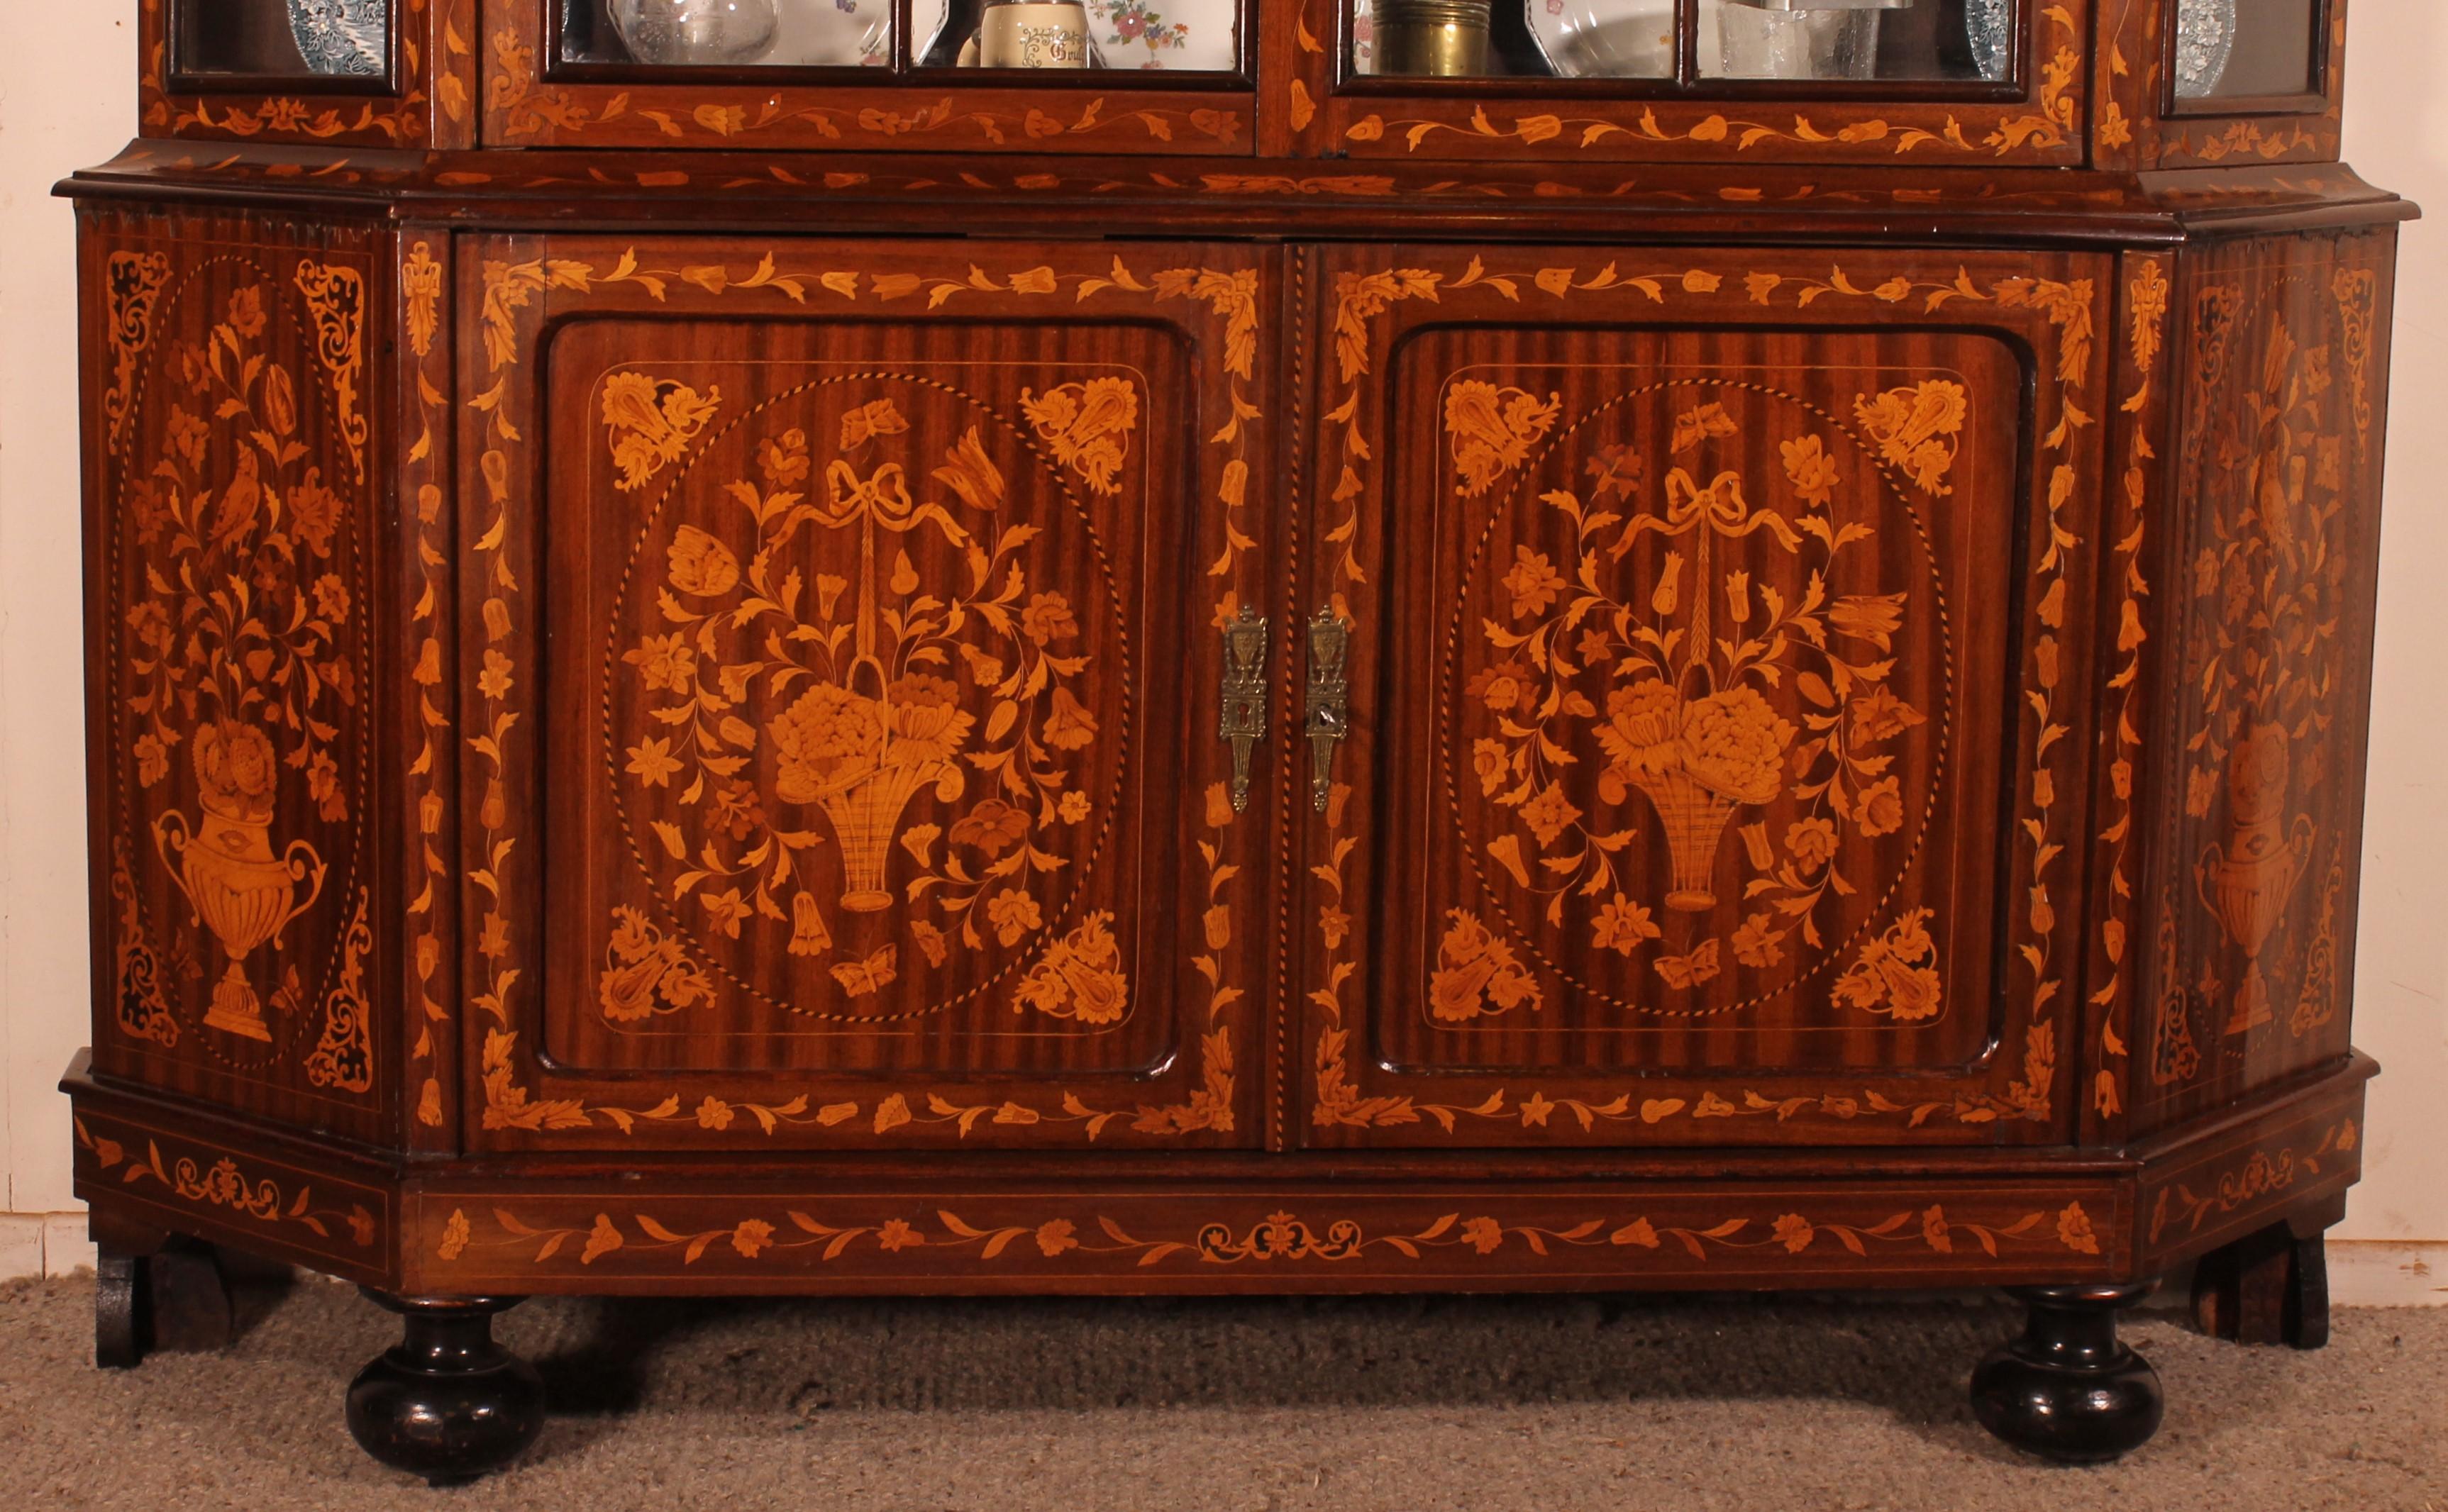 Superb Large Dutch vitrine or showcase cabinet in wood marquetry with floral decoration in mahogany, boxwood and precious wood from the 19th century

This rare vitrine has two solid doors at the bottom which is unusual since it is often composed of